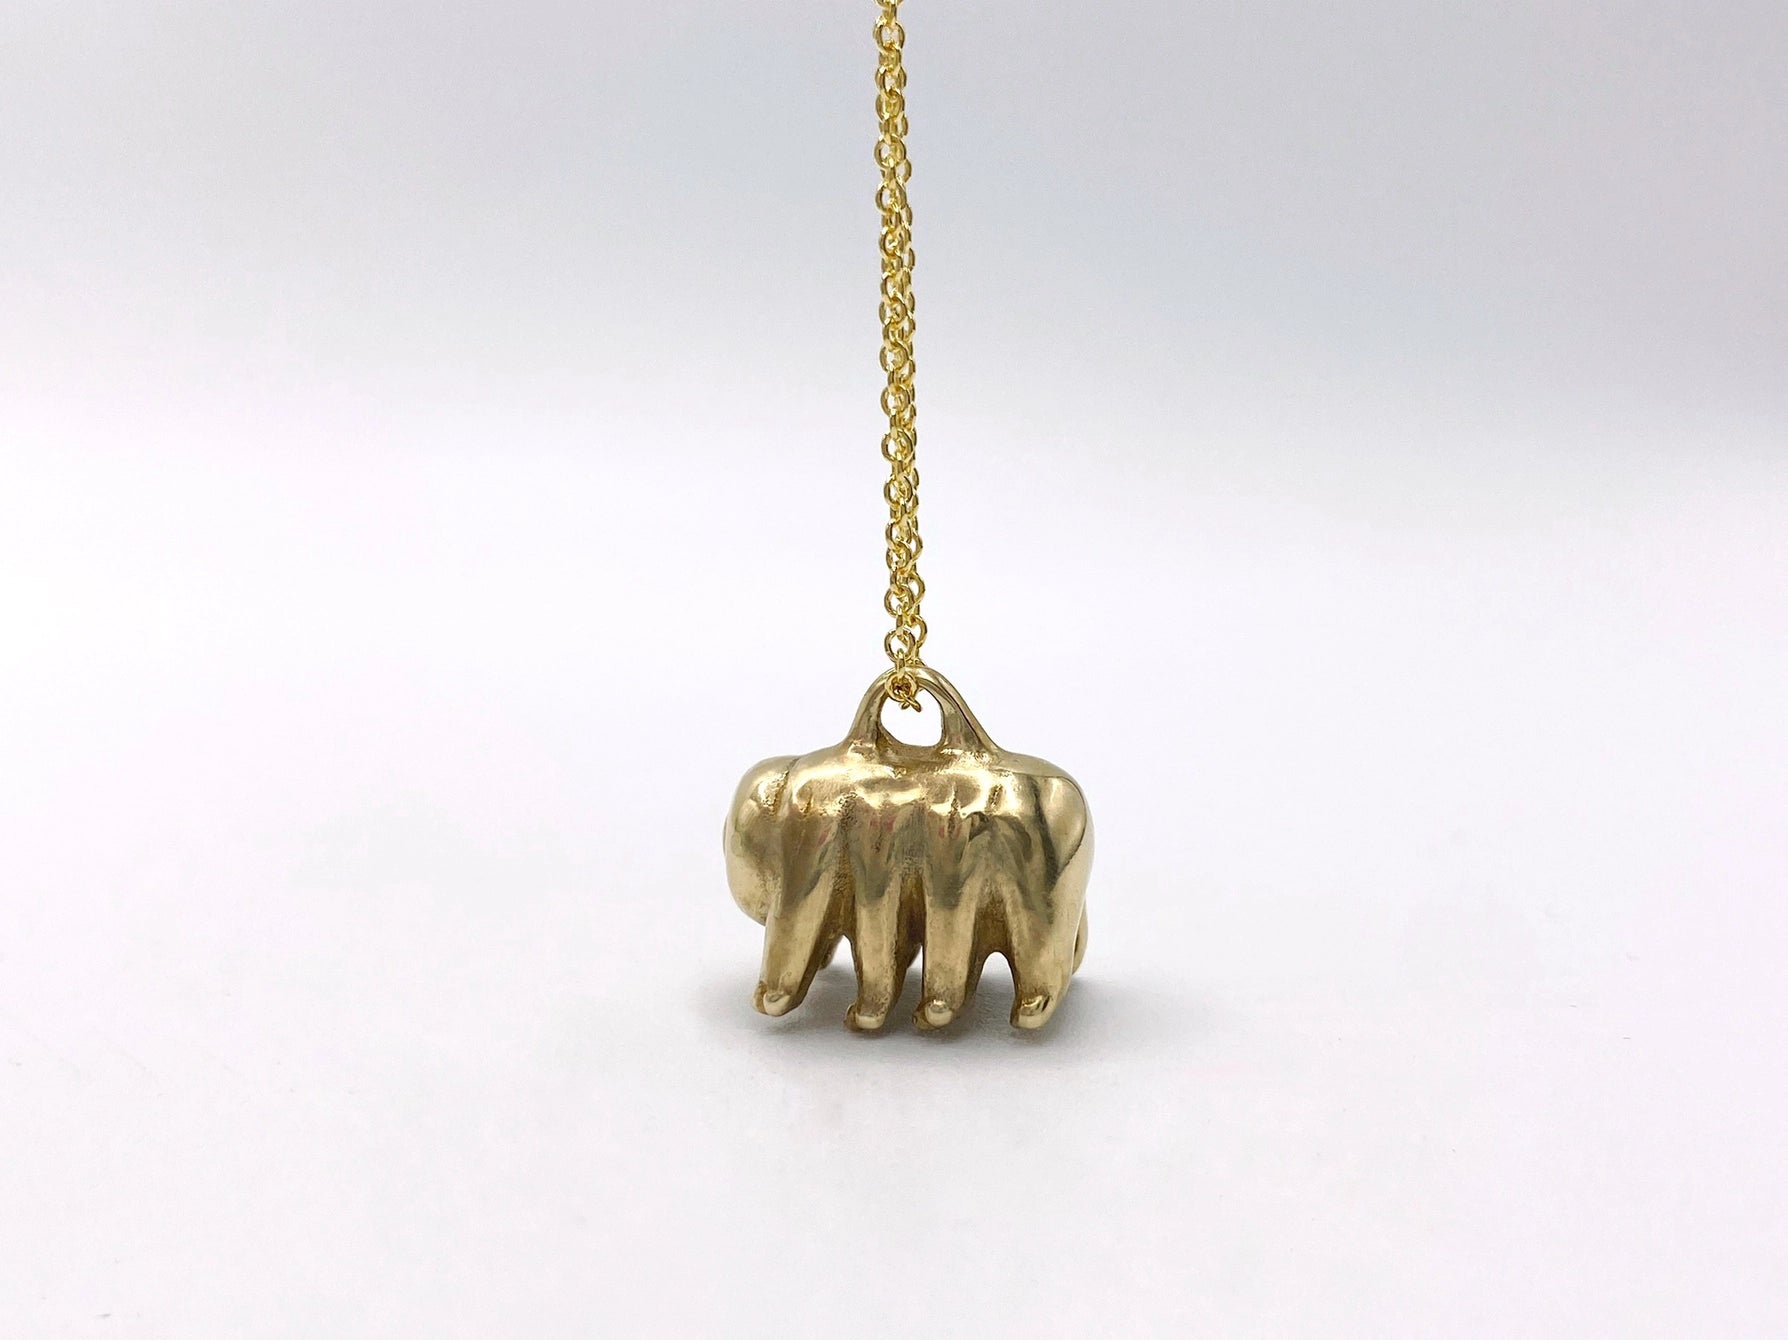 Gold filled necklace with bronze bear animal